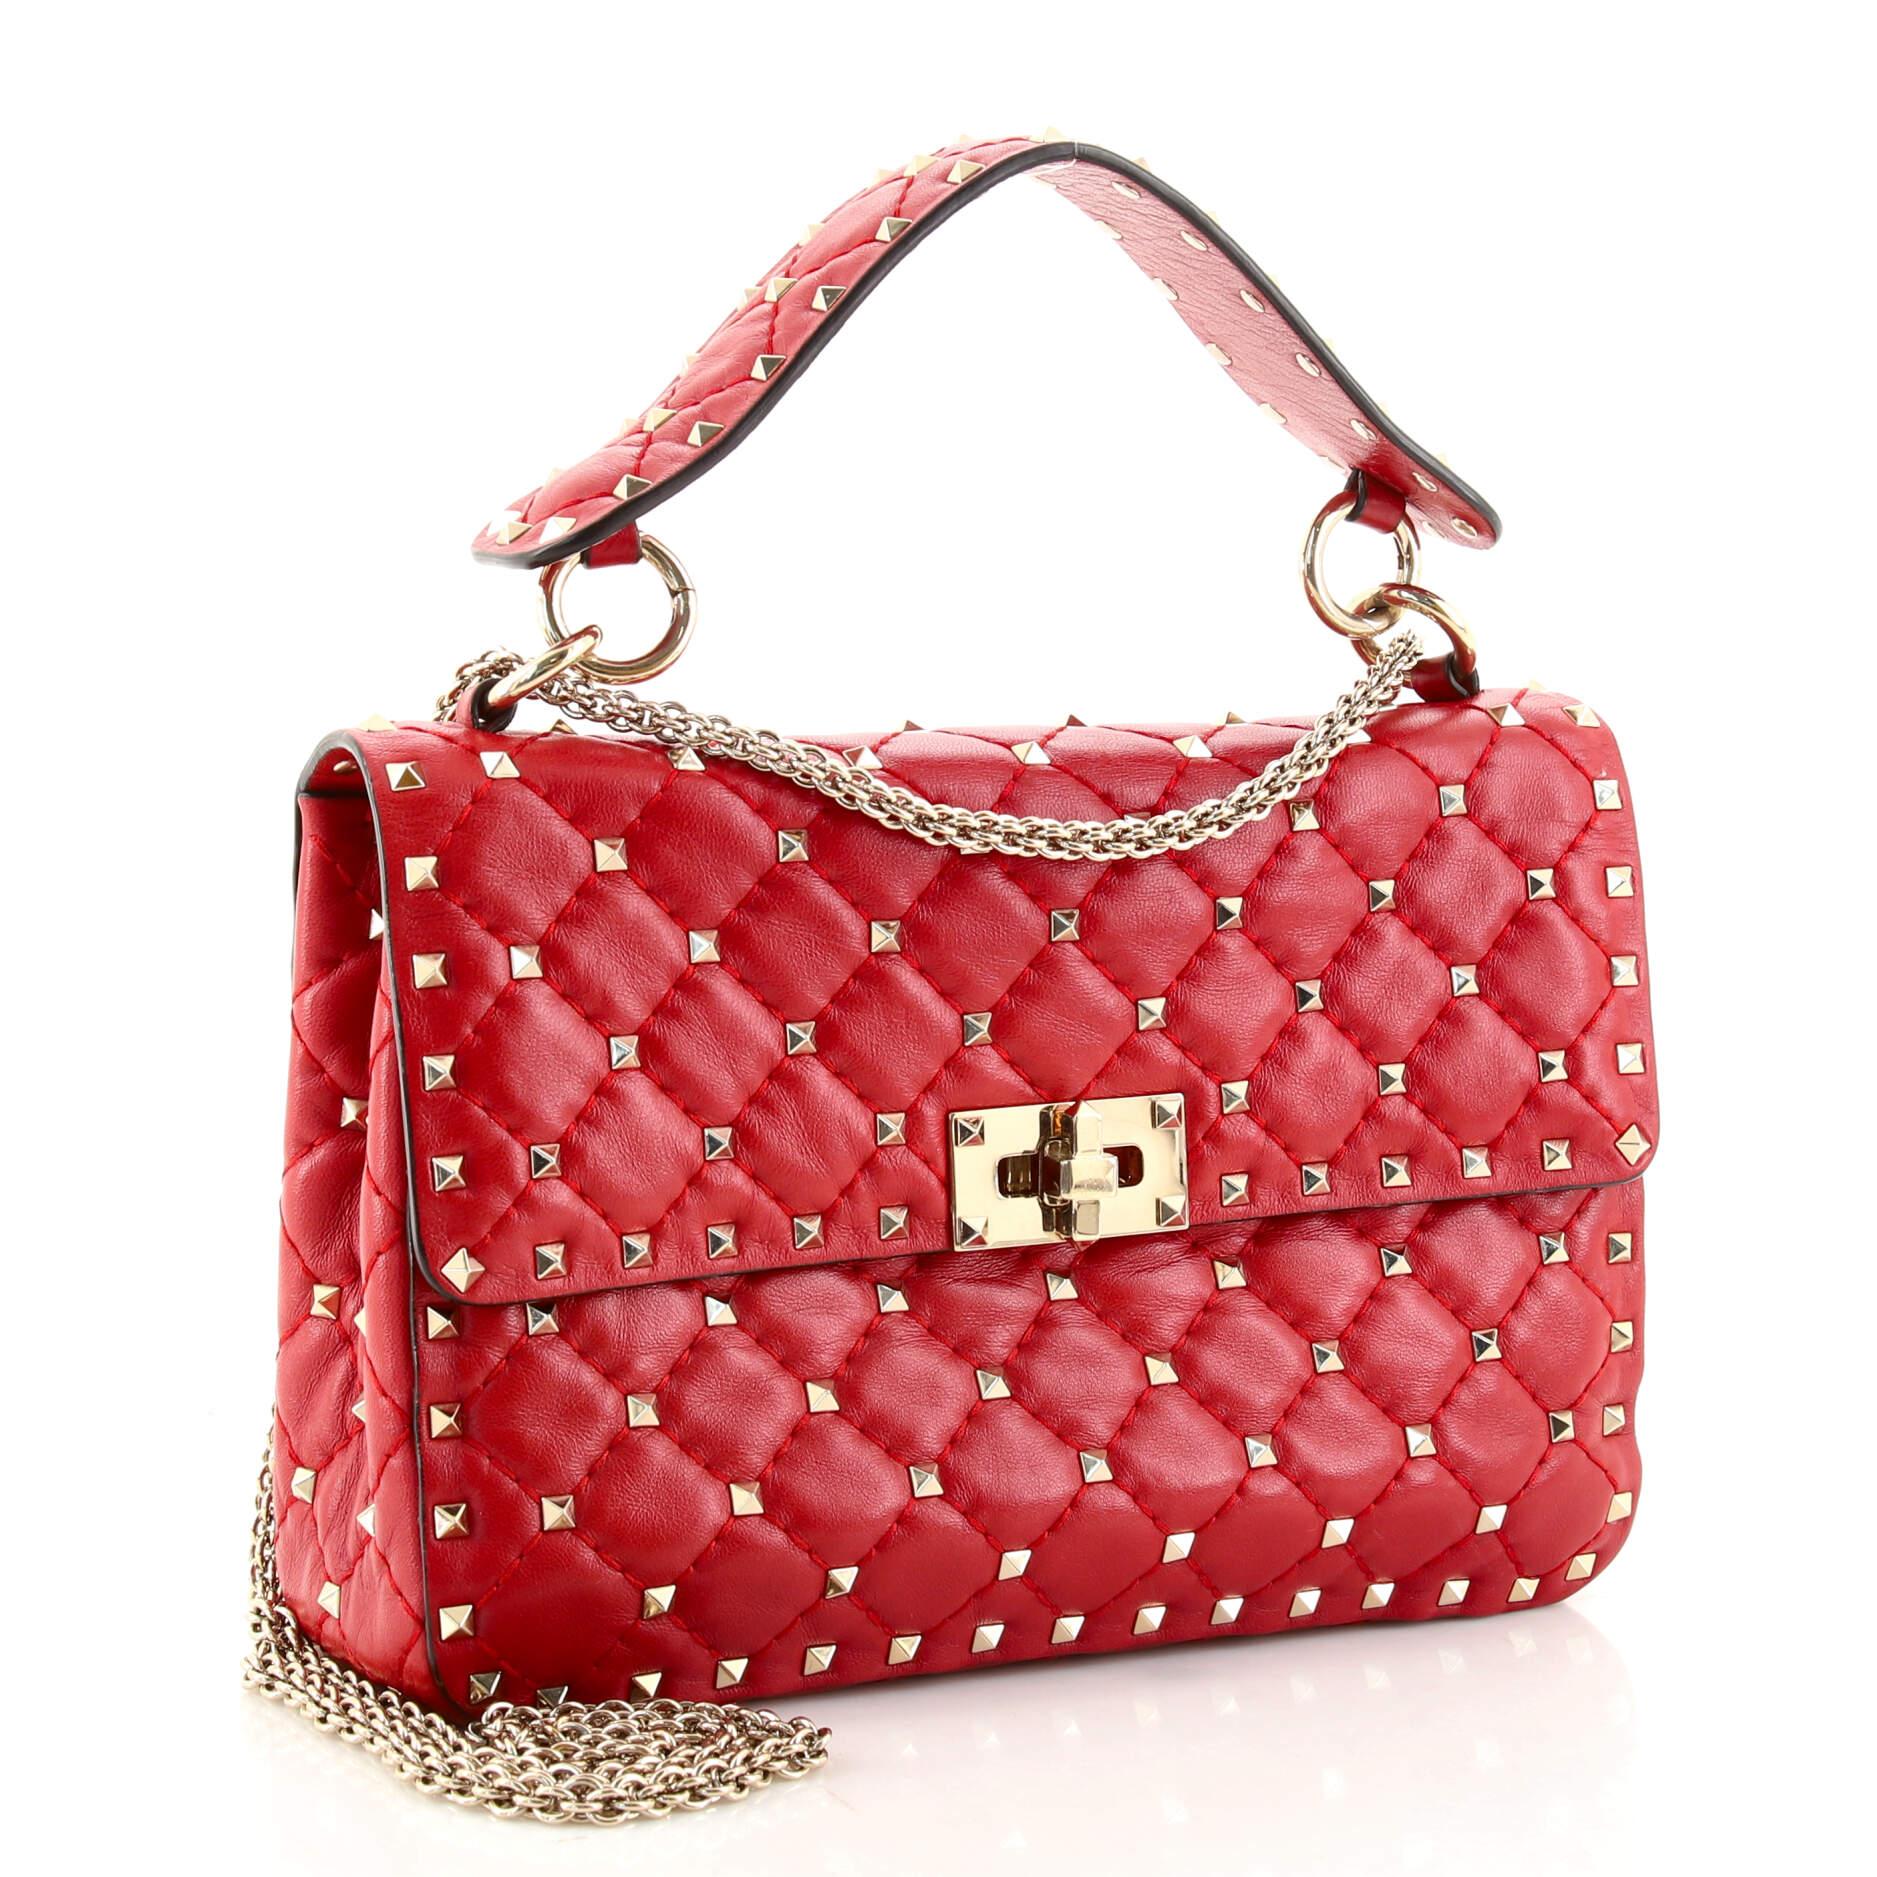 Red Valentino Rockstud Spike Flap Bag Quilted Leather Medium